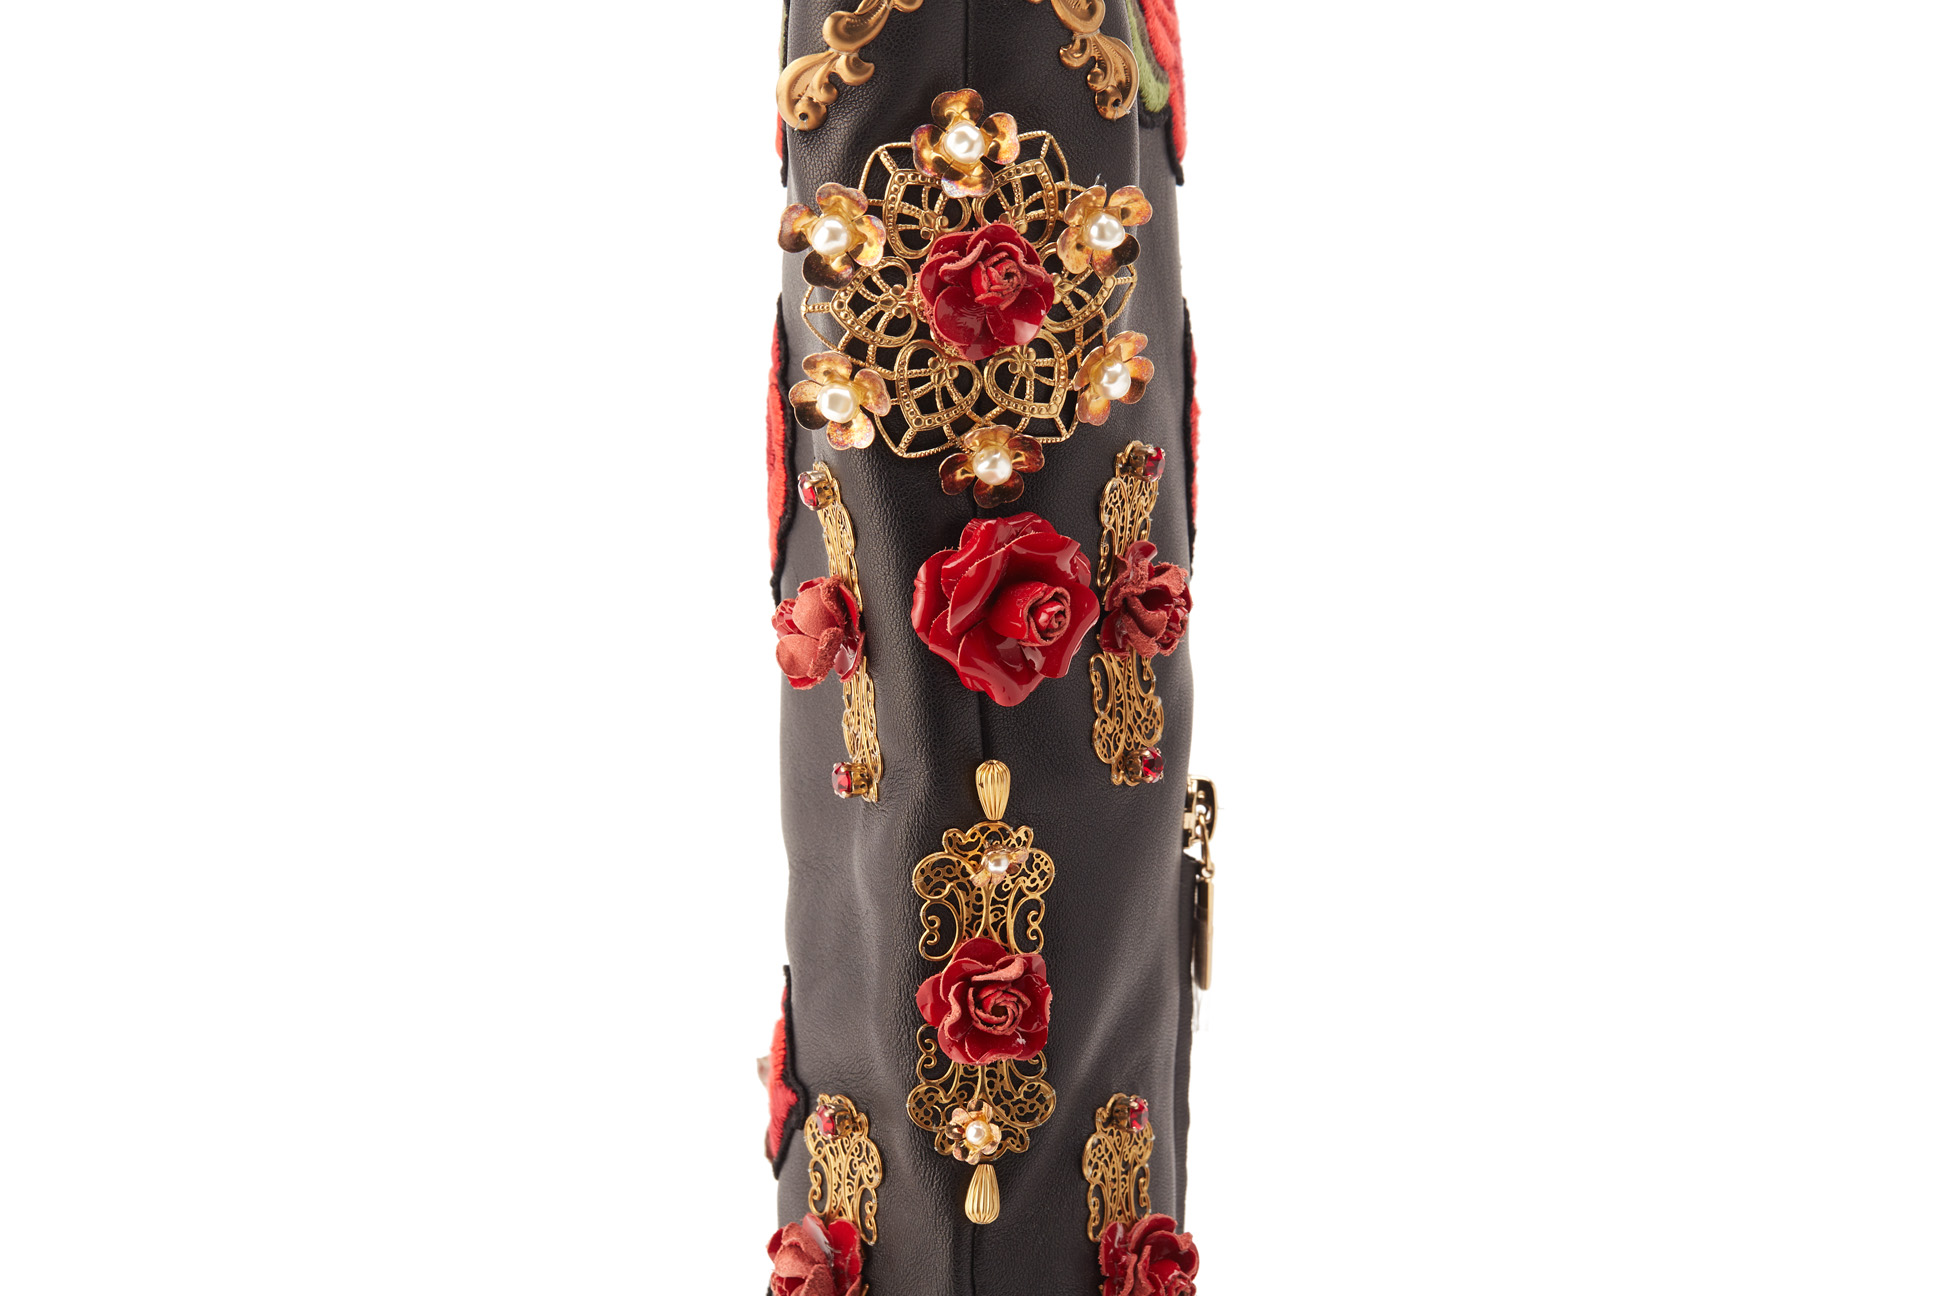 A PAIR OF DOLCE & GABBANA RED GOLD & BLACK ROSE BOOTS EU 39 - Image 5 of 8